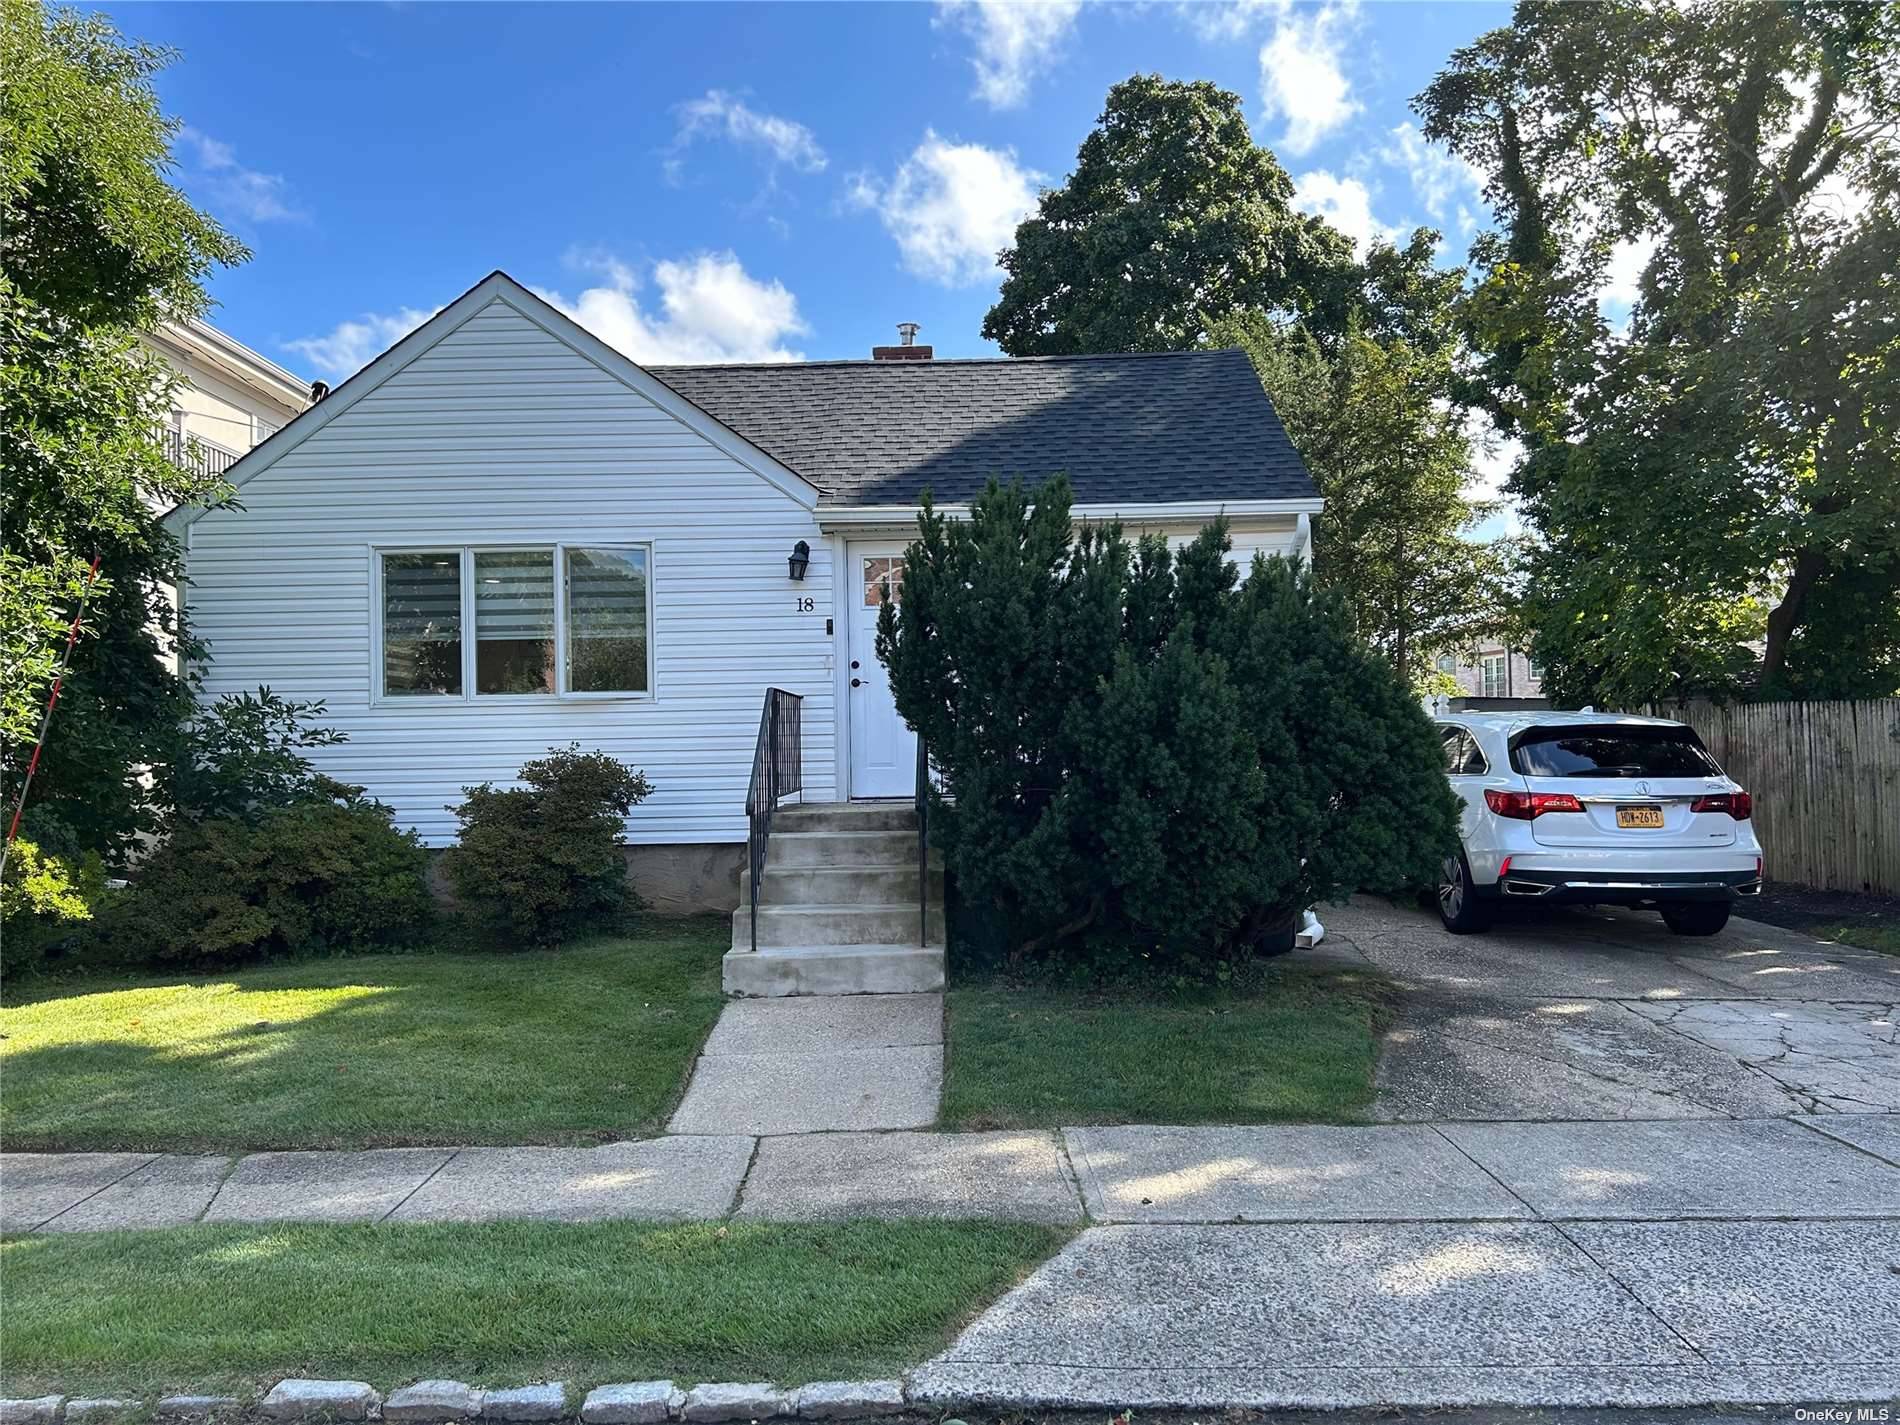 Completely Renovated, All New Inside, Full Basement, Entry Foyer, Eat In Kitchen with Marble Counter Tops, Large Living Room, Dining Area, Large Hallway, 3 Bedrooms, Full Bath.